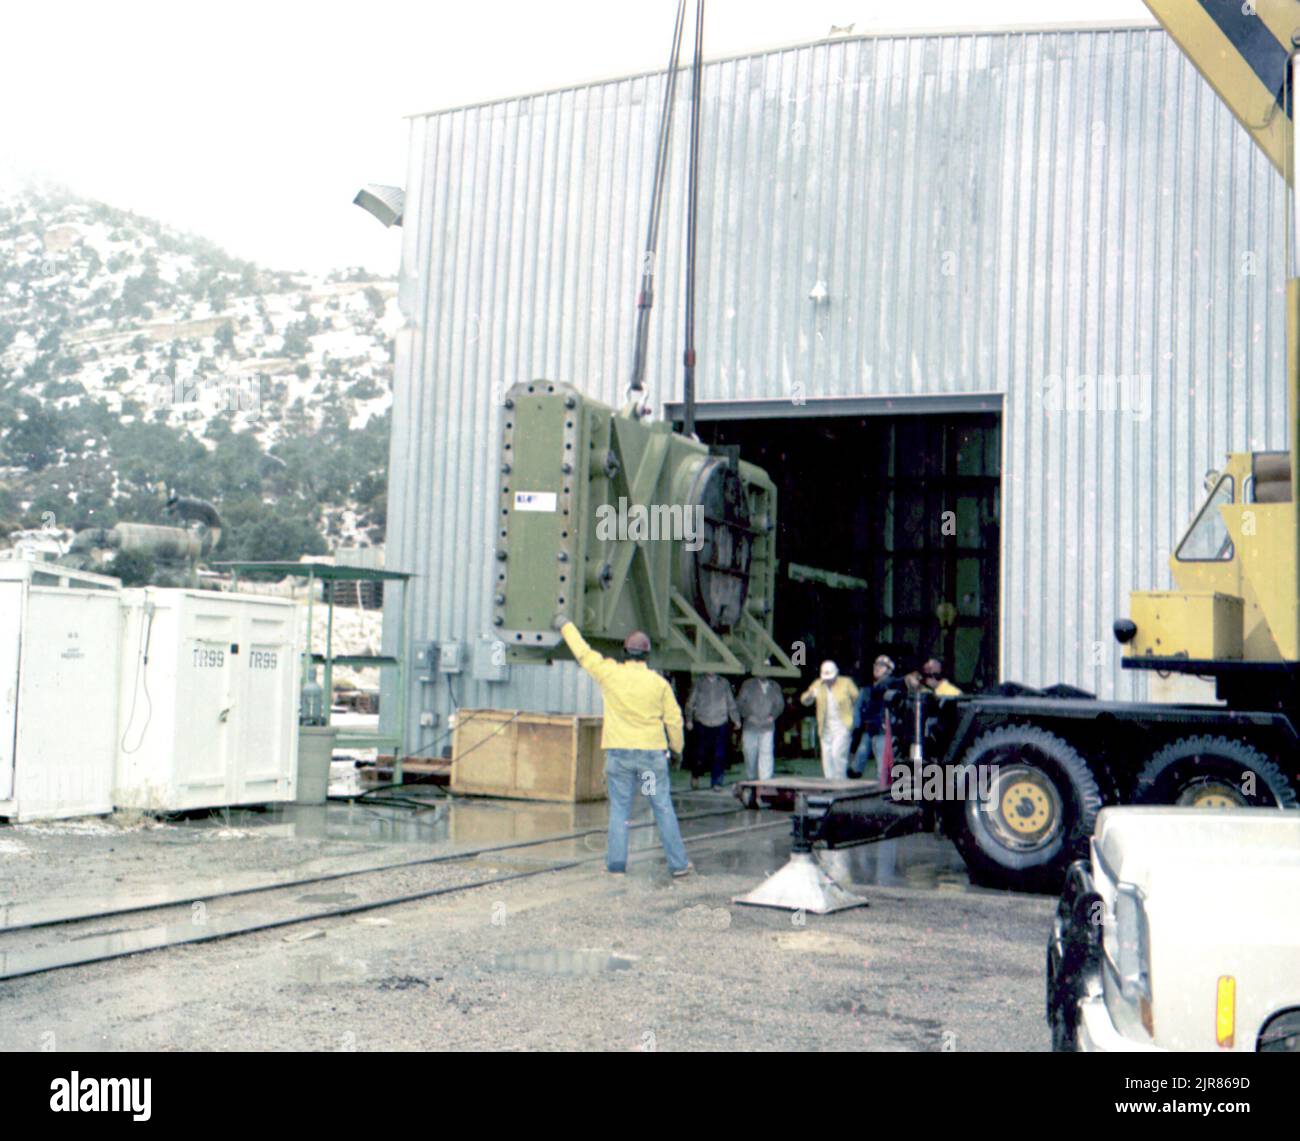 A800140 U12N MINERS IRON DAC UNLOADING TEISHER(Project Engineer) JAN 7 80EG&G/NTS PHOTO LAB Publication Date: 1/7/1980  CRANES; DAC UNLOADING; DACS; EQUIPMENT & INSTRUMENTS; INSTRUMENTS & EQUIPMENT; MINERS IRON; MINERS, IRON ORE; MINES (WEAPON); N-TUNNEL; NEVADA; NEVADA TEST SITE; NTS; NUCLEAR ENERGY TECHNOLOGY; TEST SITES; UGT; UNDERGROUND TESTING; WAREHOUSES  historical images. 1972 - 2012. Department of Energy. National Nuclear Security Administration. Photographs Related to Nuclear Weapons Testing at the Nevada Test Site. Stock Photo